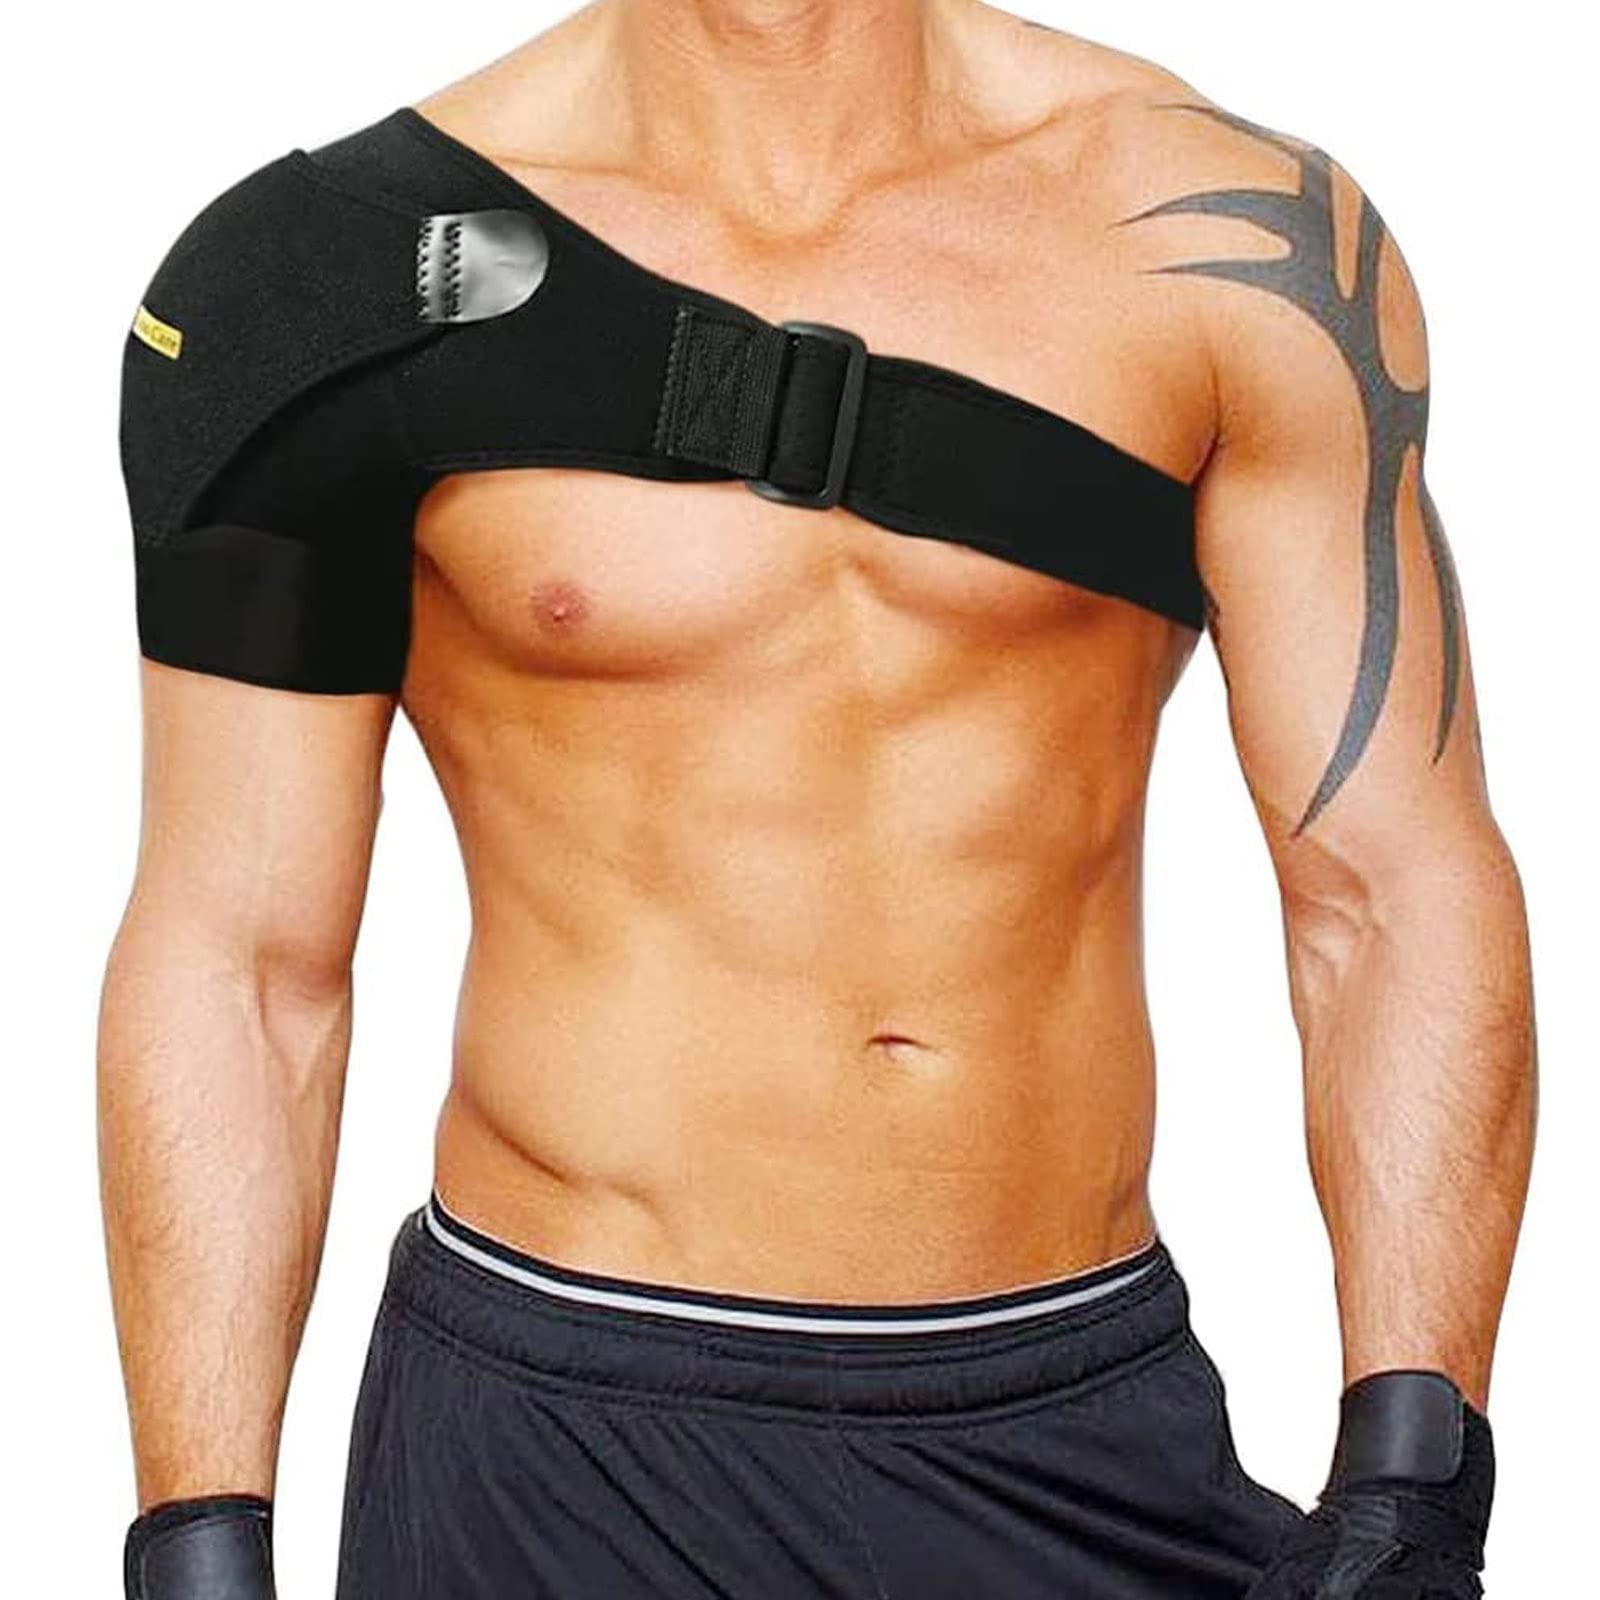 Babo Care Shoulder Stability Brace with Pressure Pad, Breathable Neoprene Shoulder Support Brace for Torn Rotator Cuff, Dislocated AC Joint, Labrum Tear, Shoulder Pain Relief, Shoulder Compression Sleeve